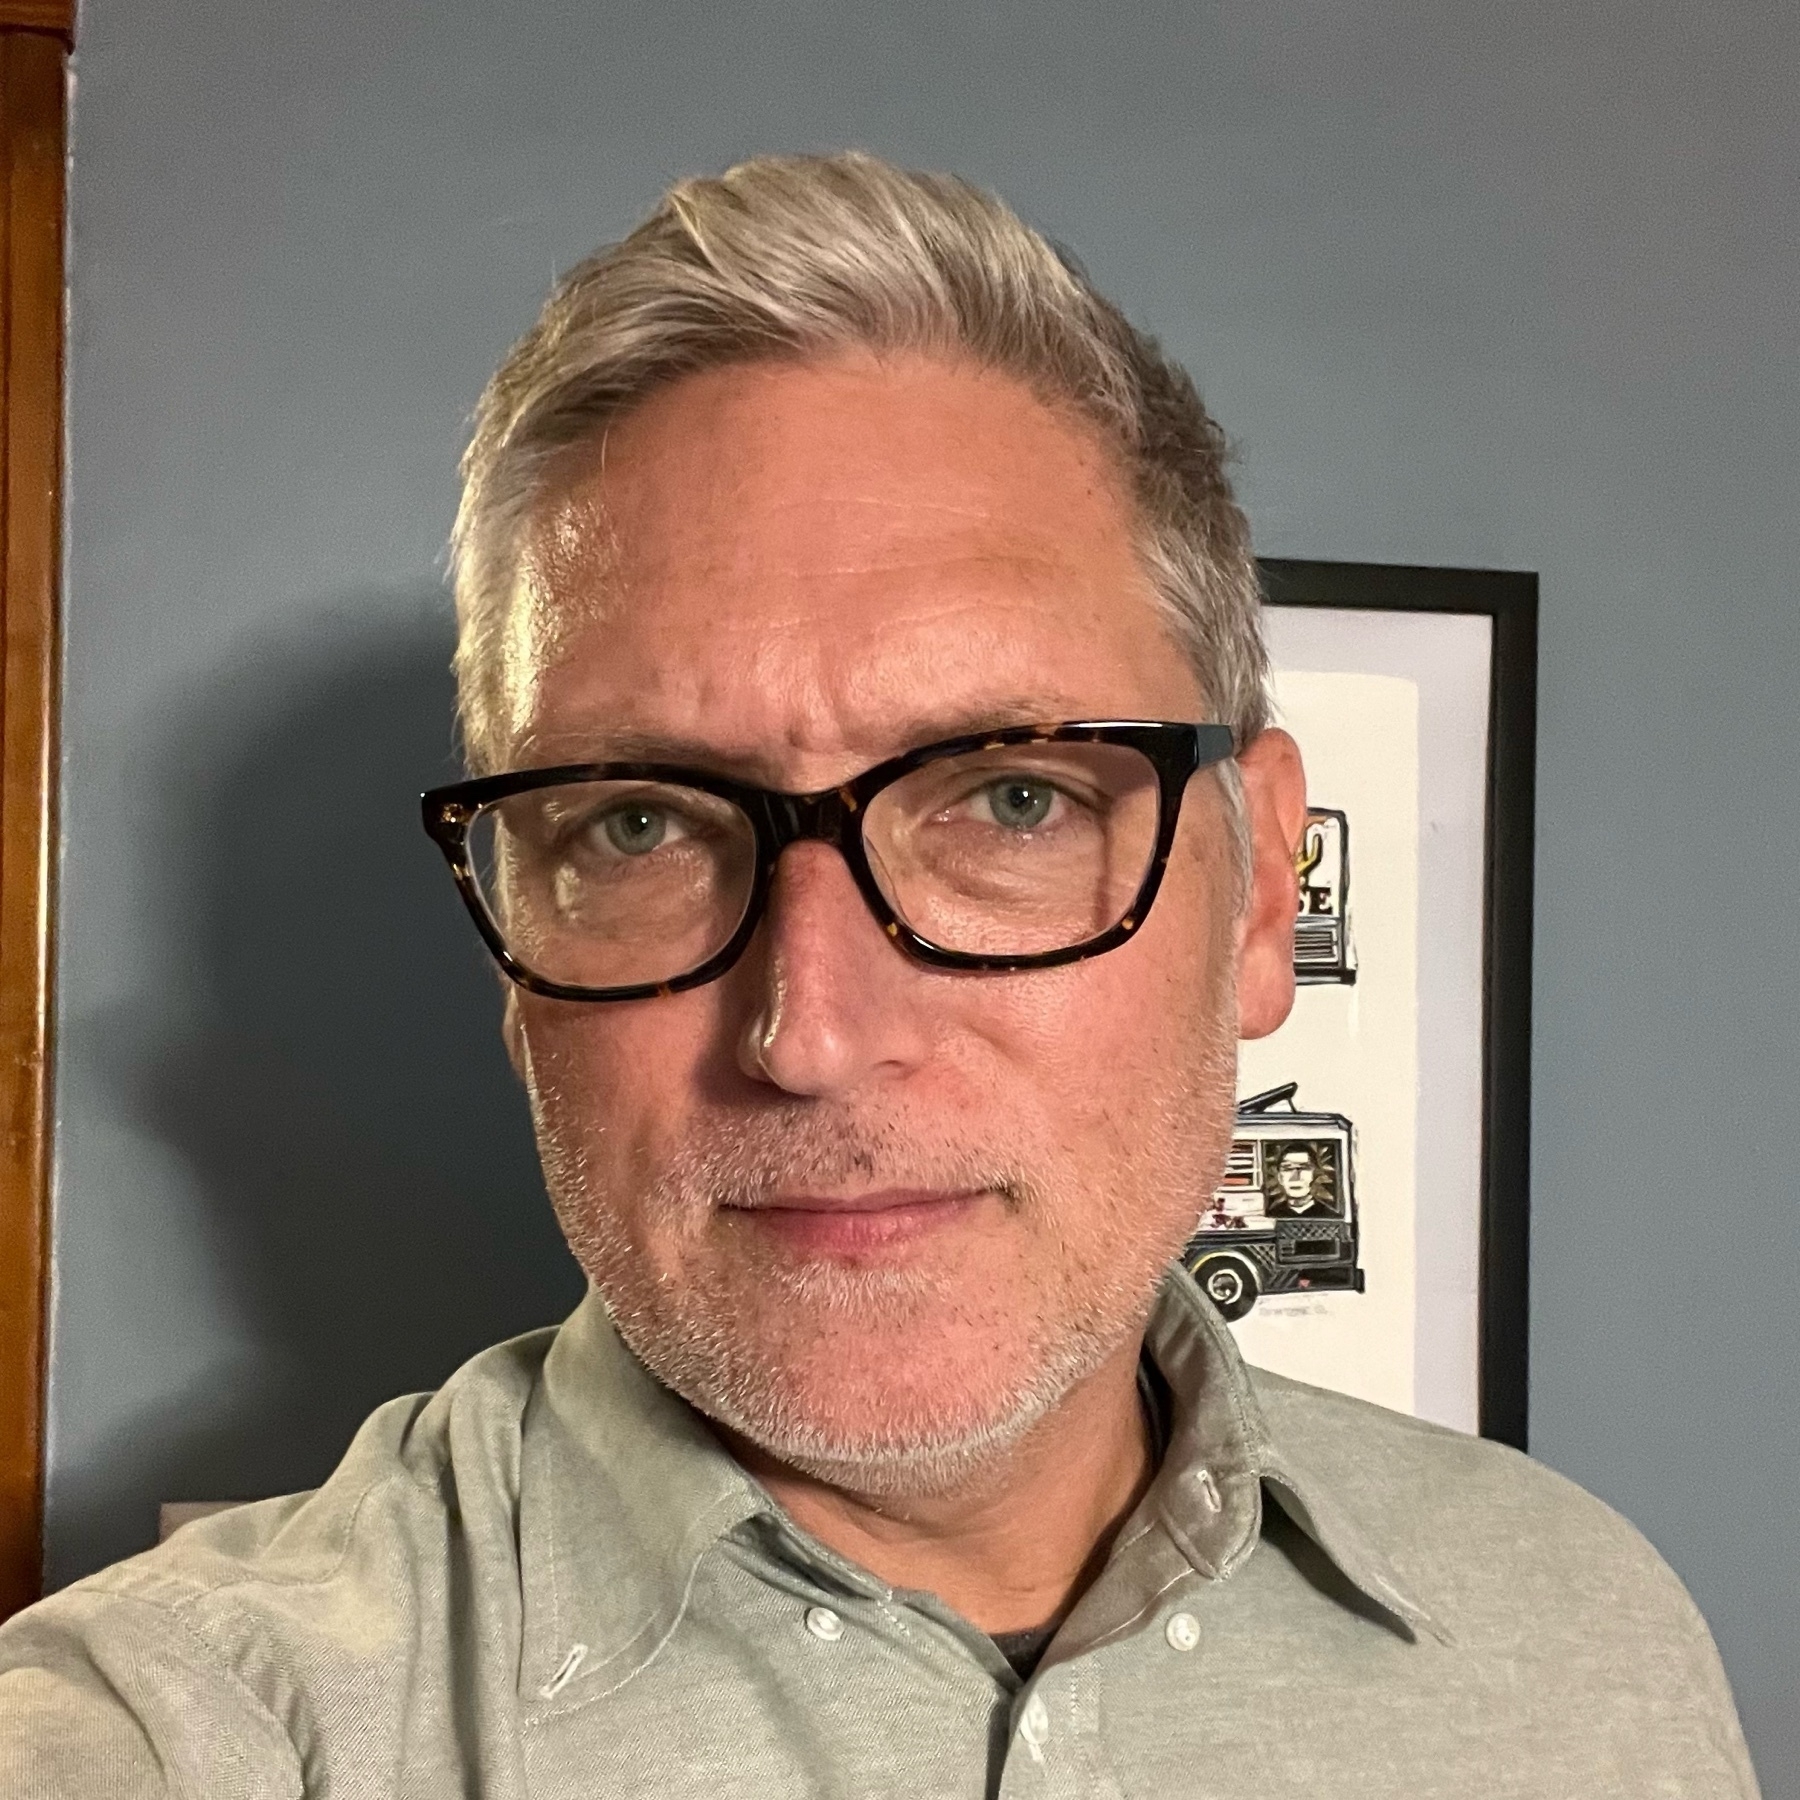 selfie if a caucasian 48 yo with glasses and grey hair